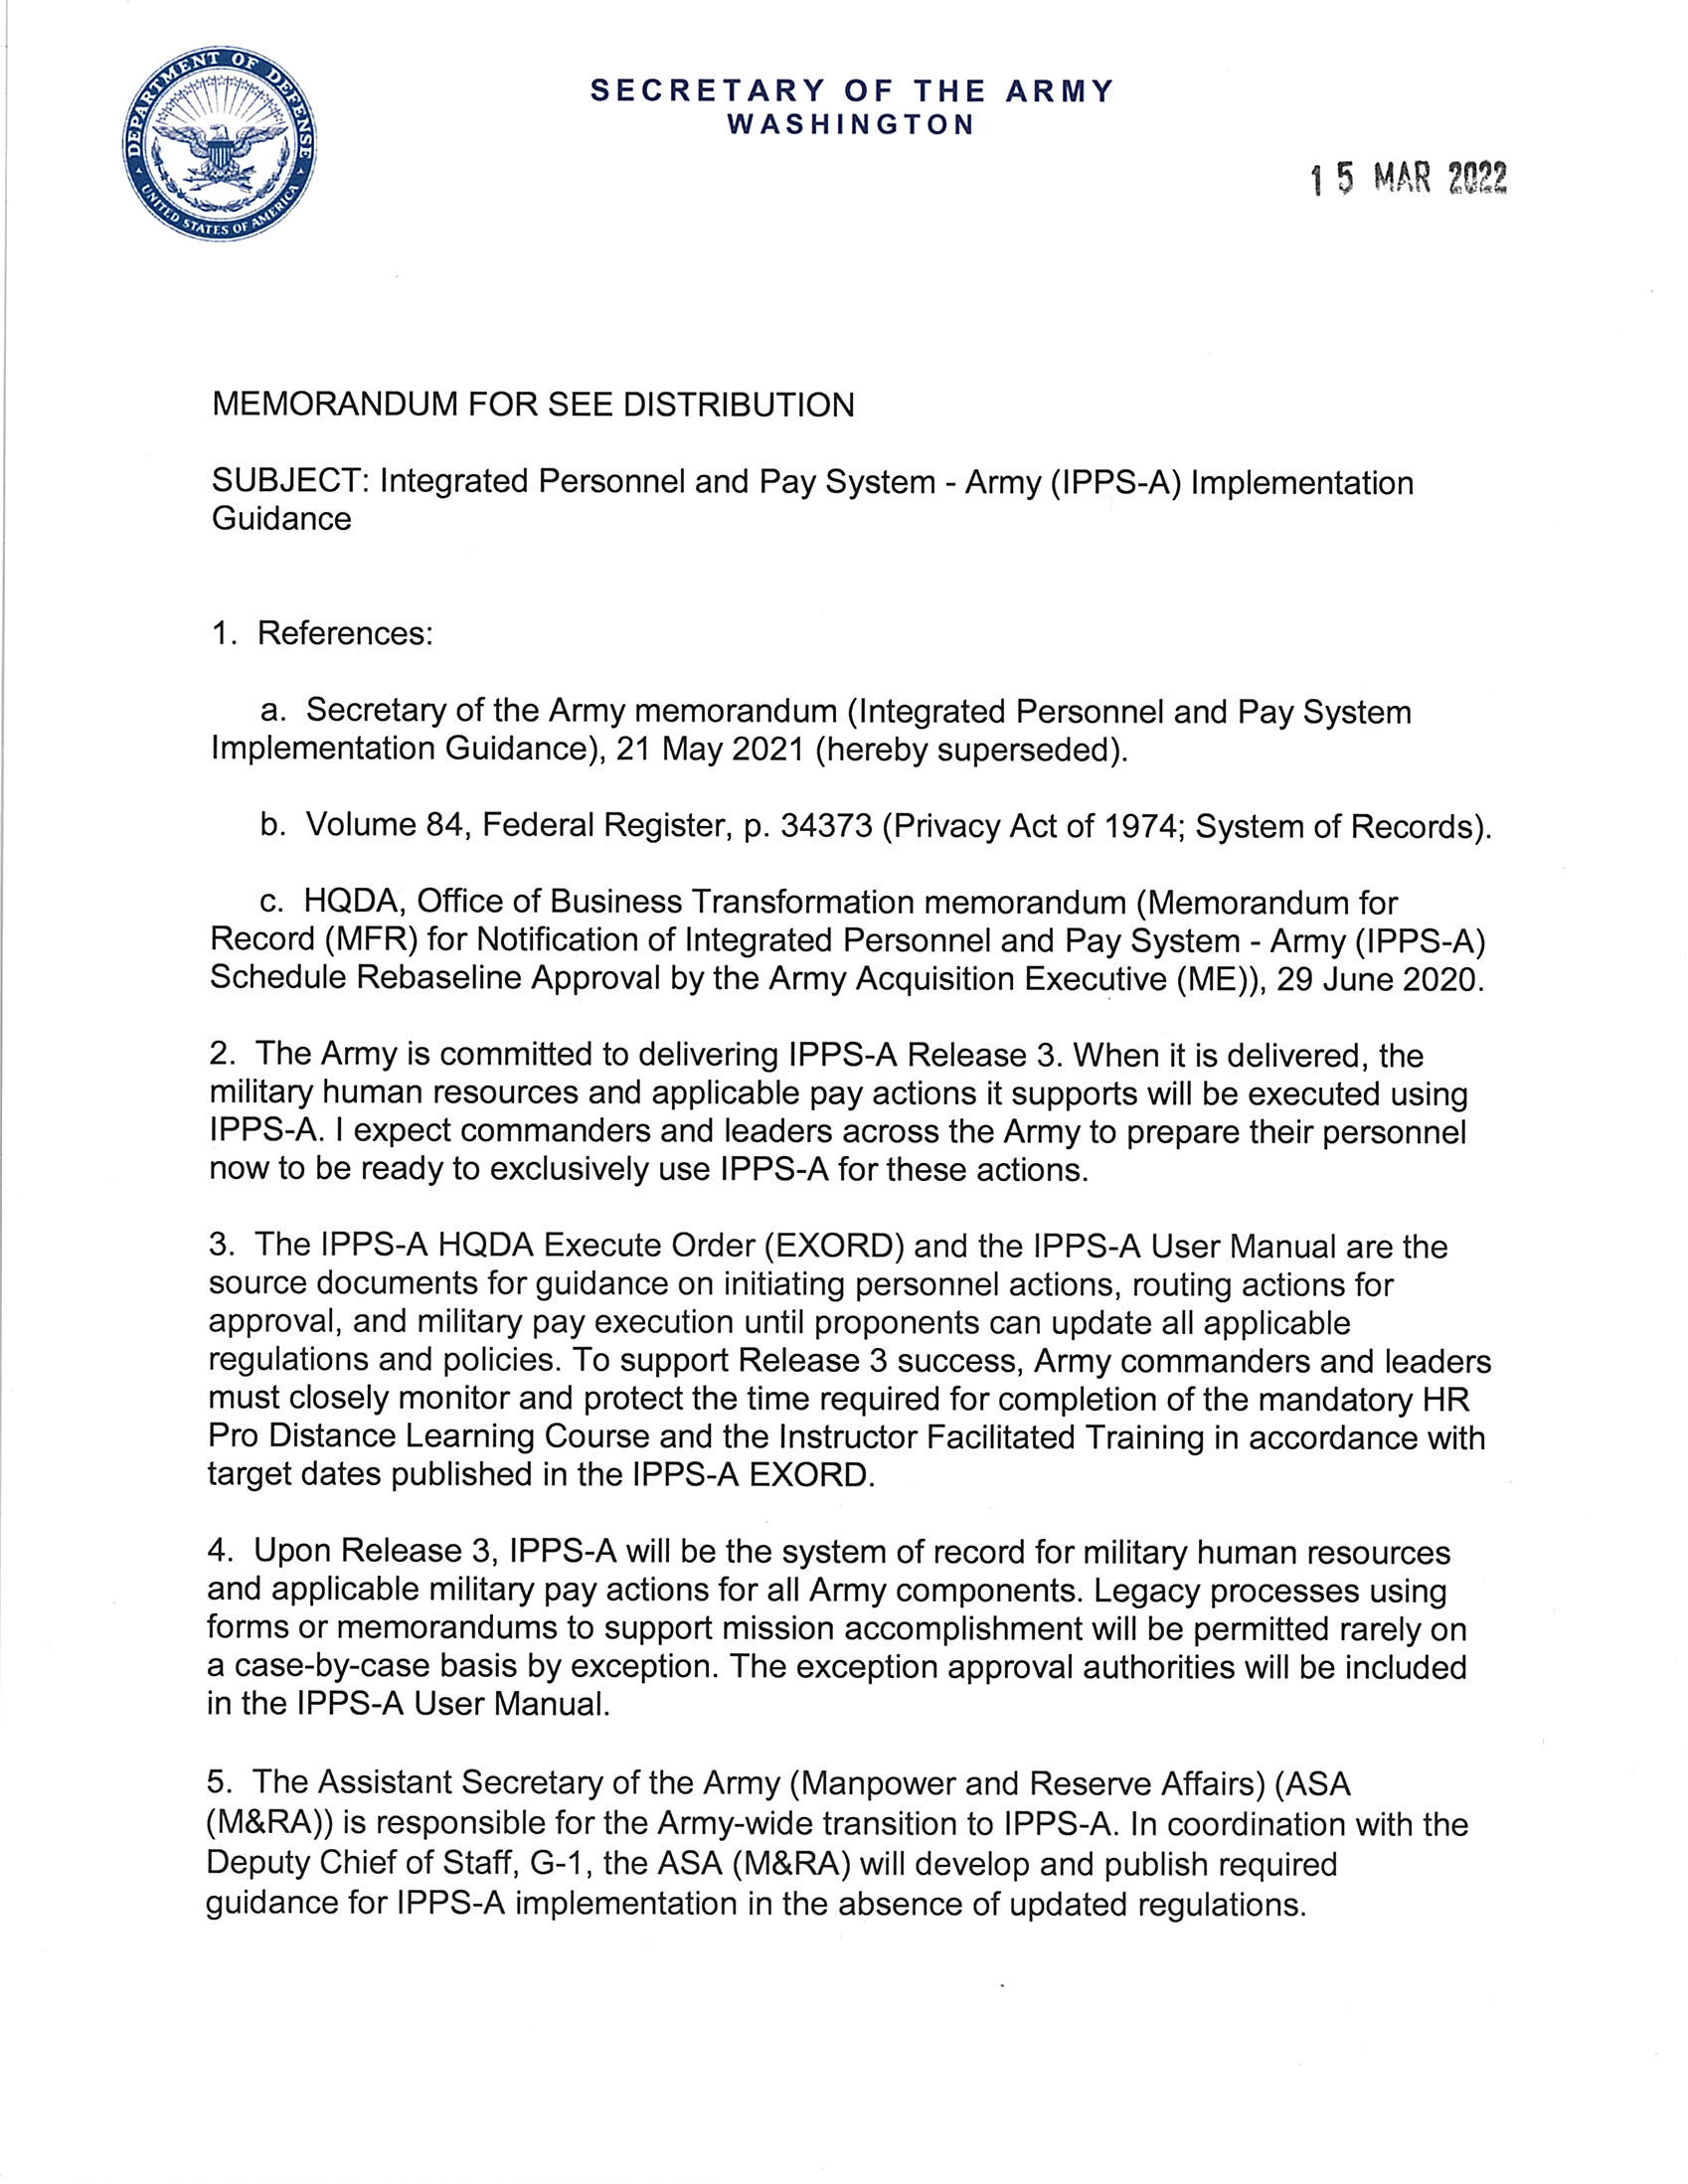  SecArmy IPPS-A Implementation Guidance Memo (March 2022)